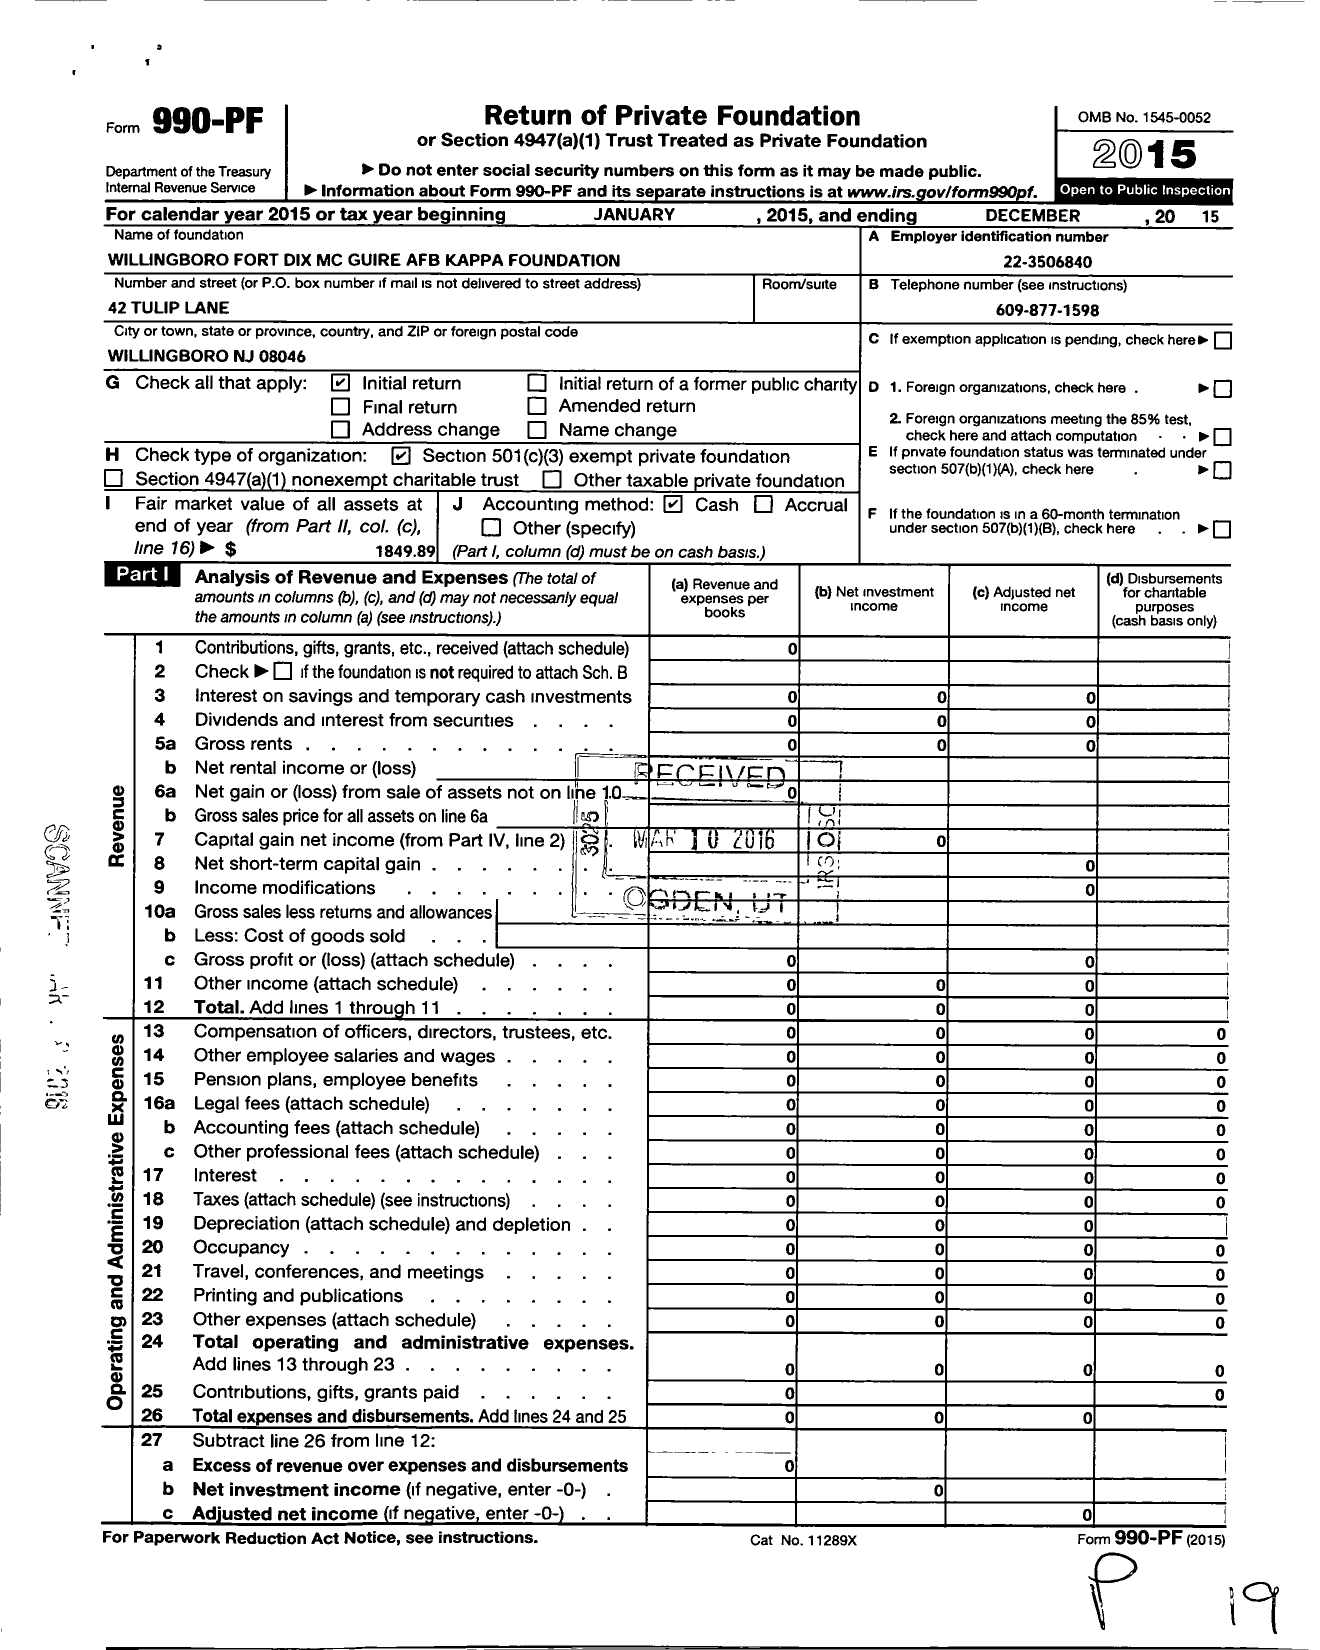 Image of first page of 2015 Form 990PF for Wilingboro Fort Dix MC Guire Afb Kappa Foundation